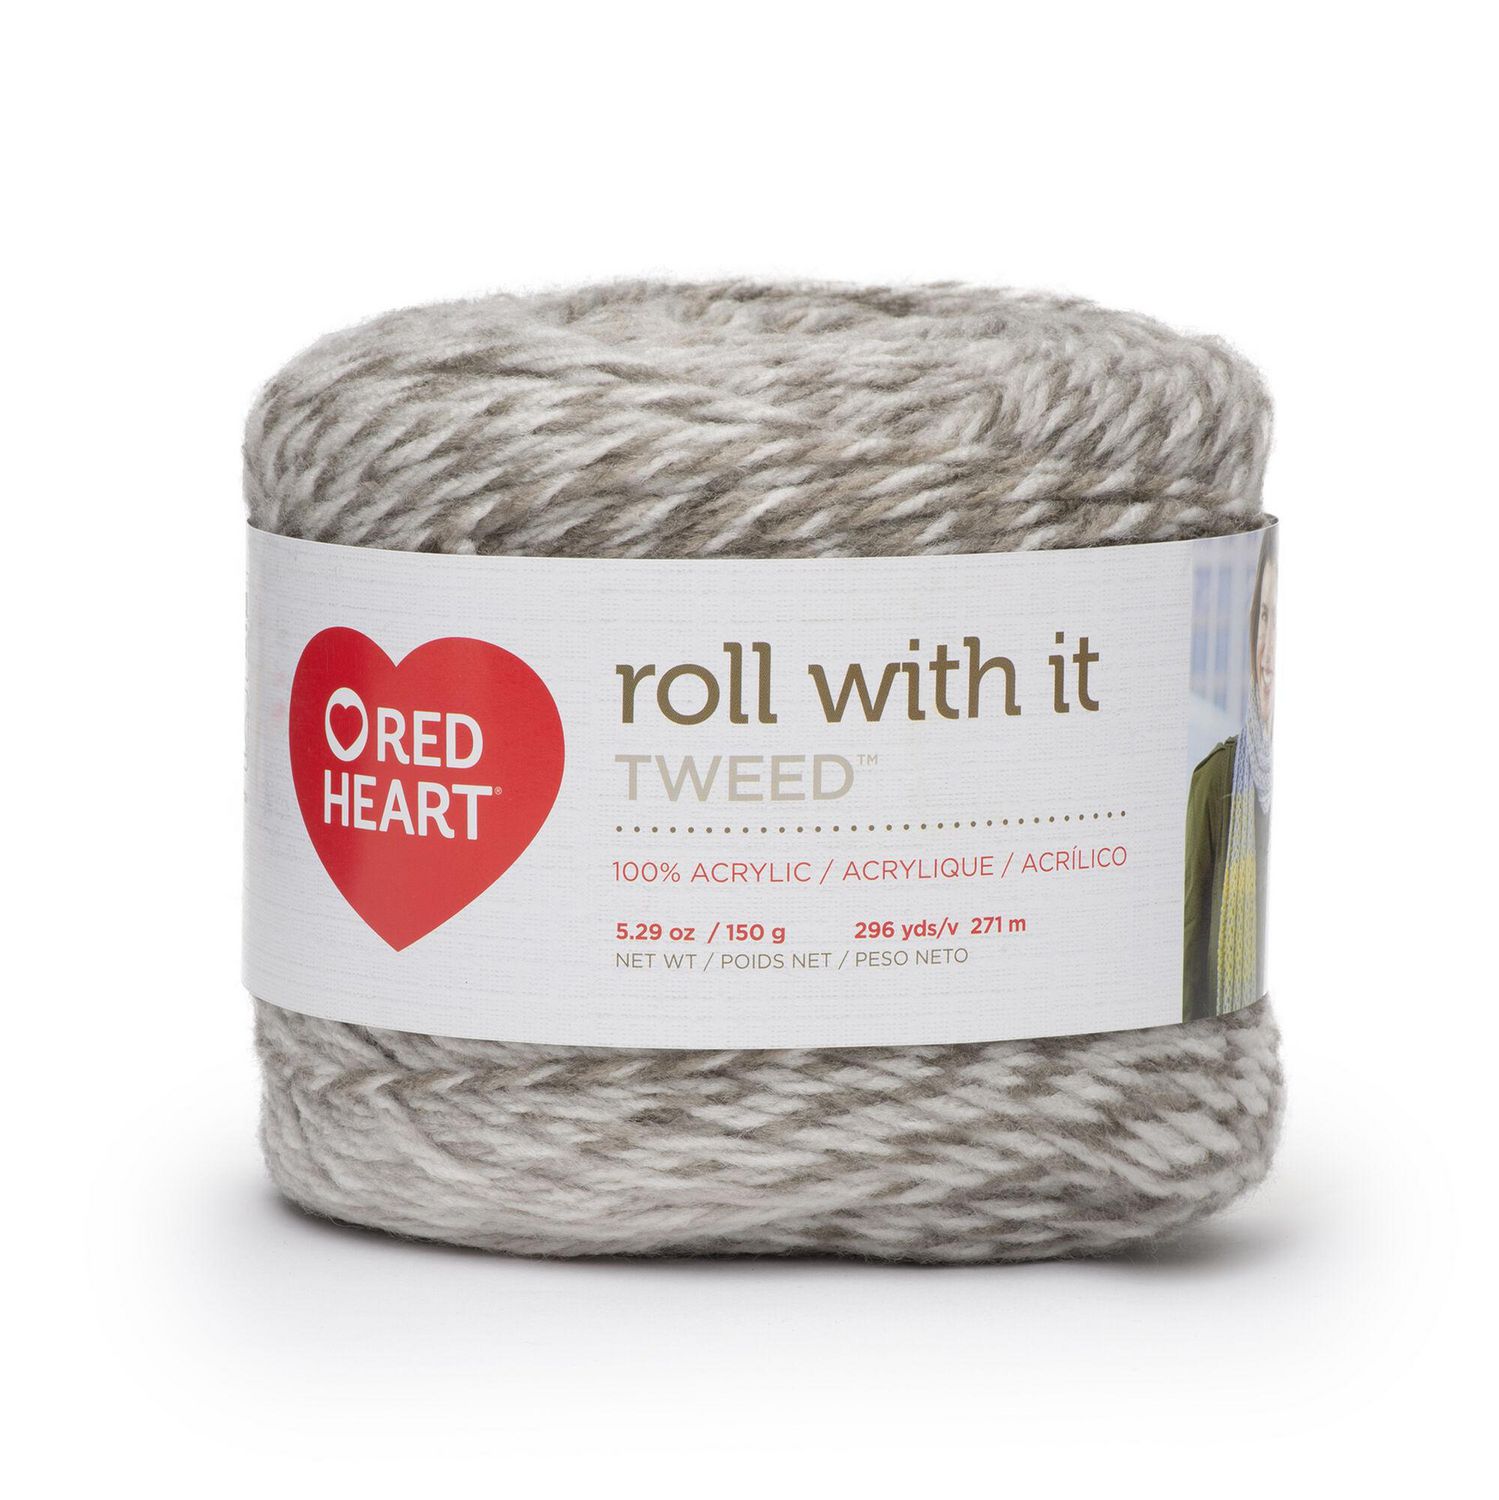 Red Heart Roll with It Tweed Yarn (150 g / 5.29 oz), Cloudy Day